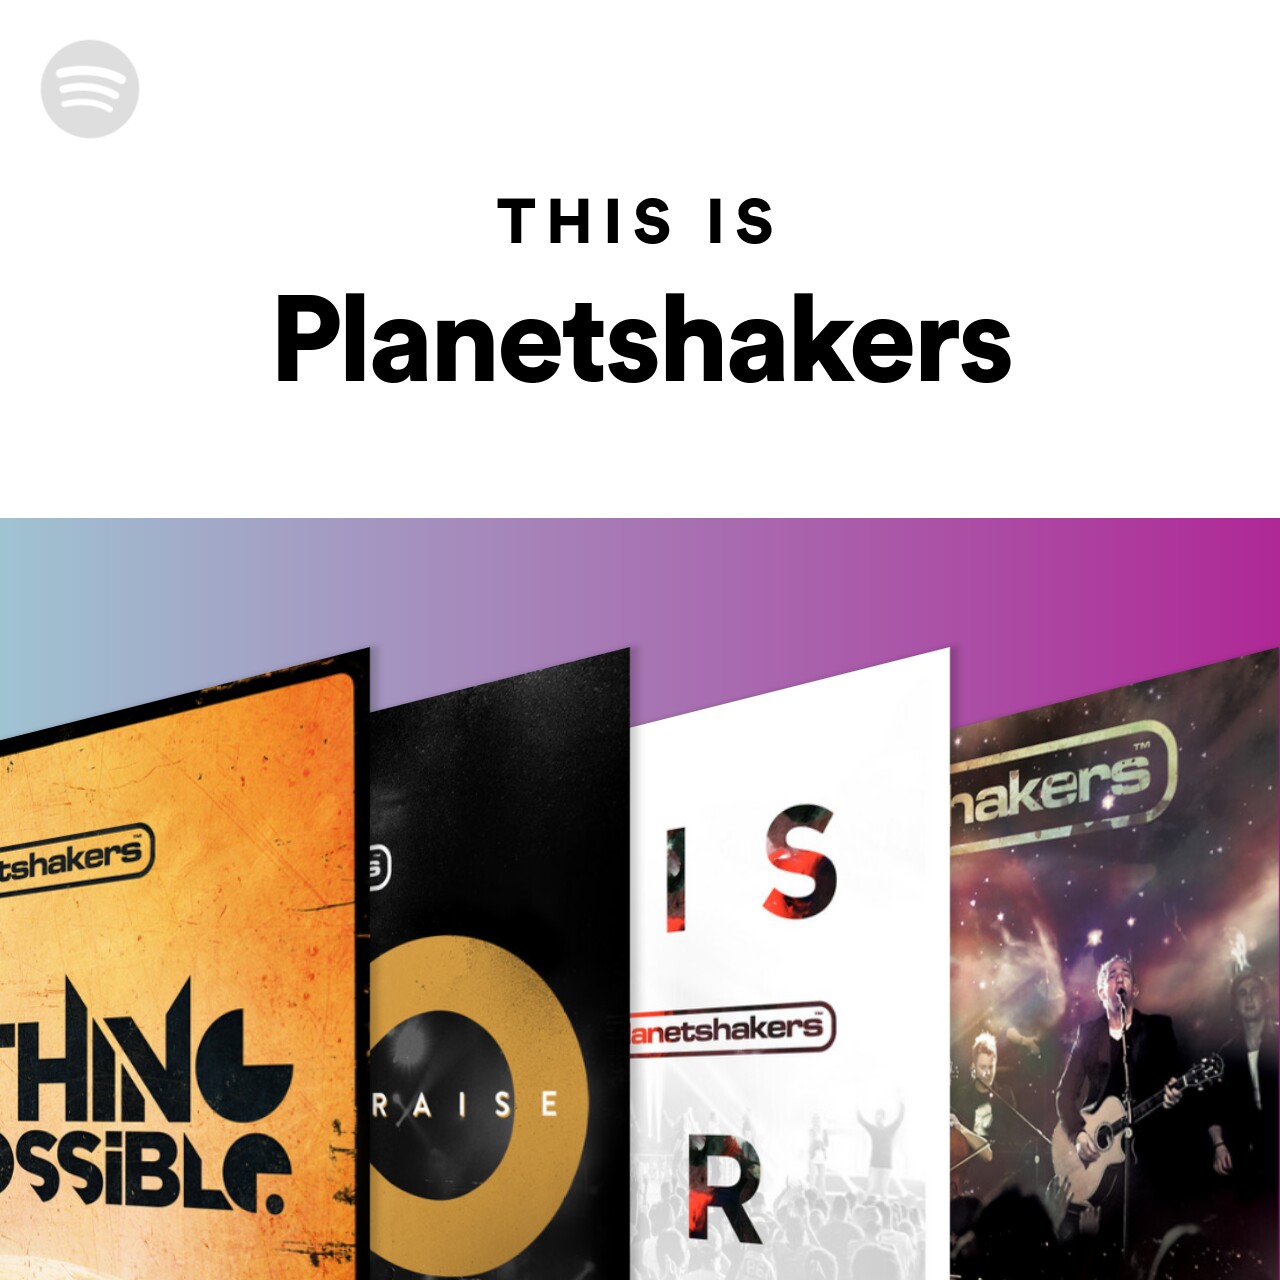 This Is Planetshakers